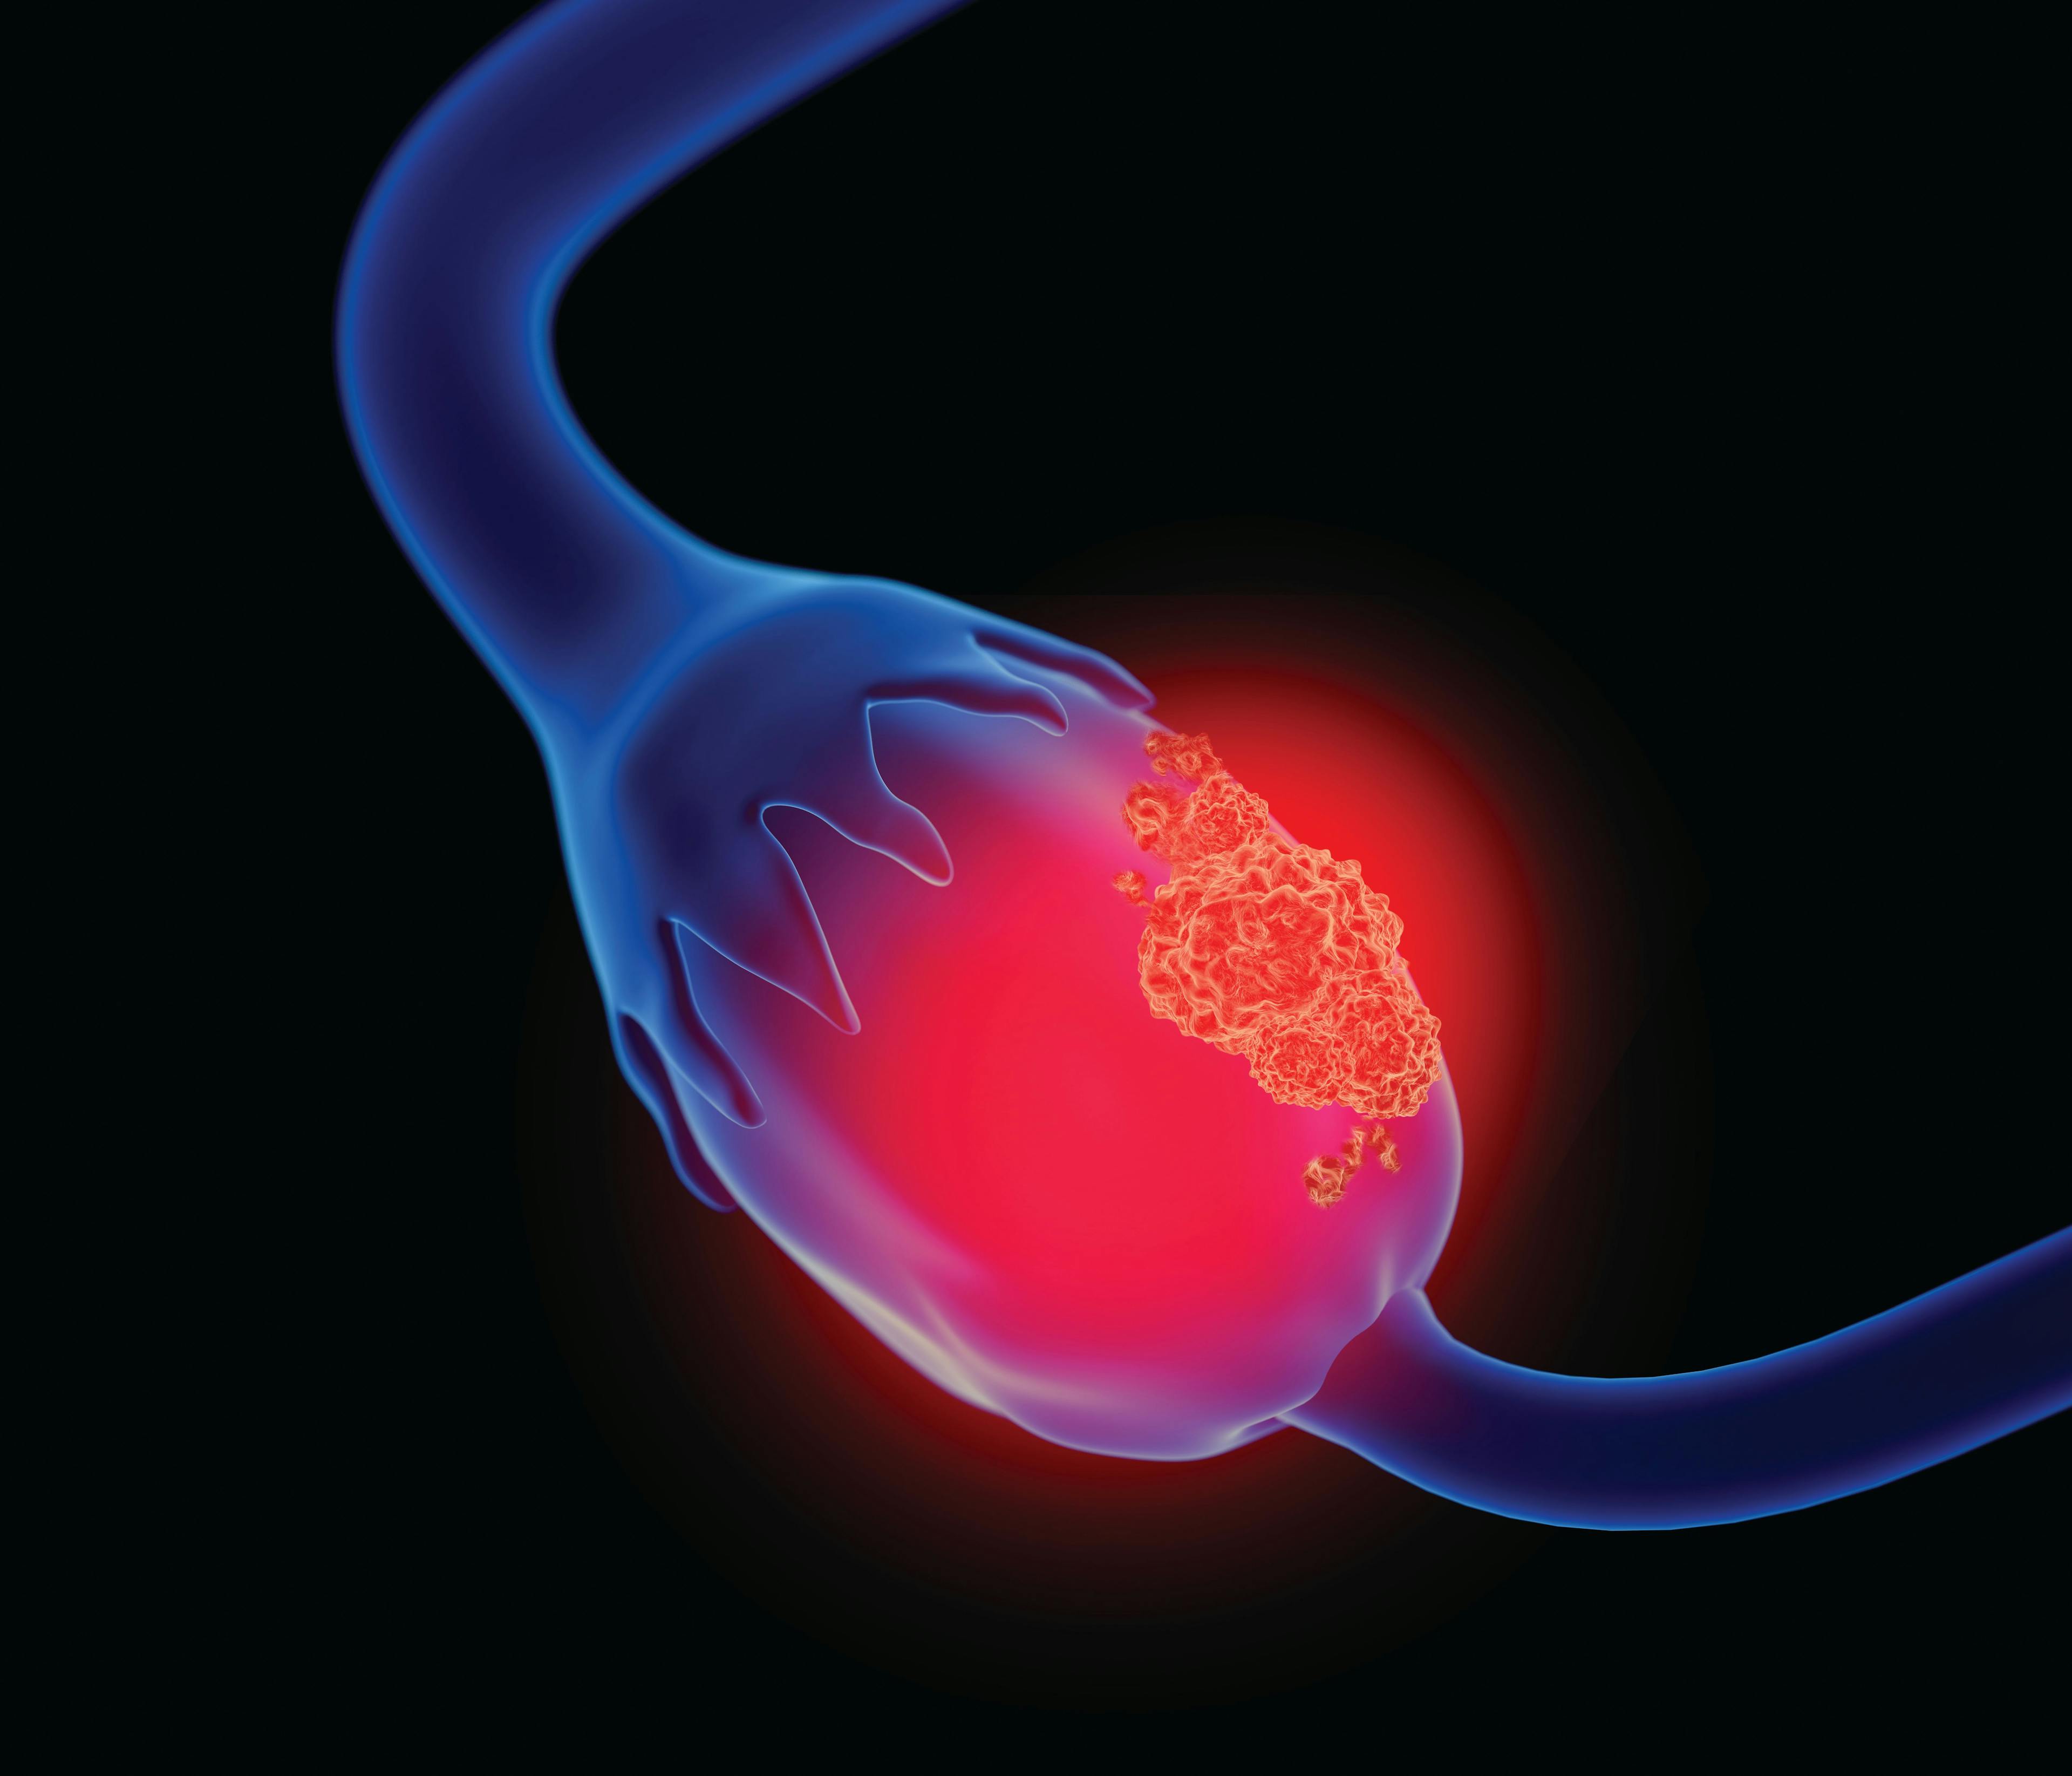 Small Study Finds Potential Risk of Hematologic Abnormalities After Ovarian Cancer Treatment